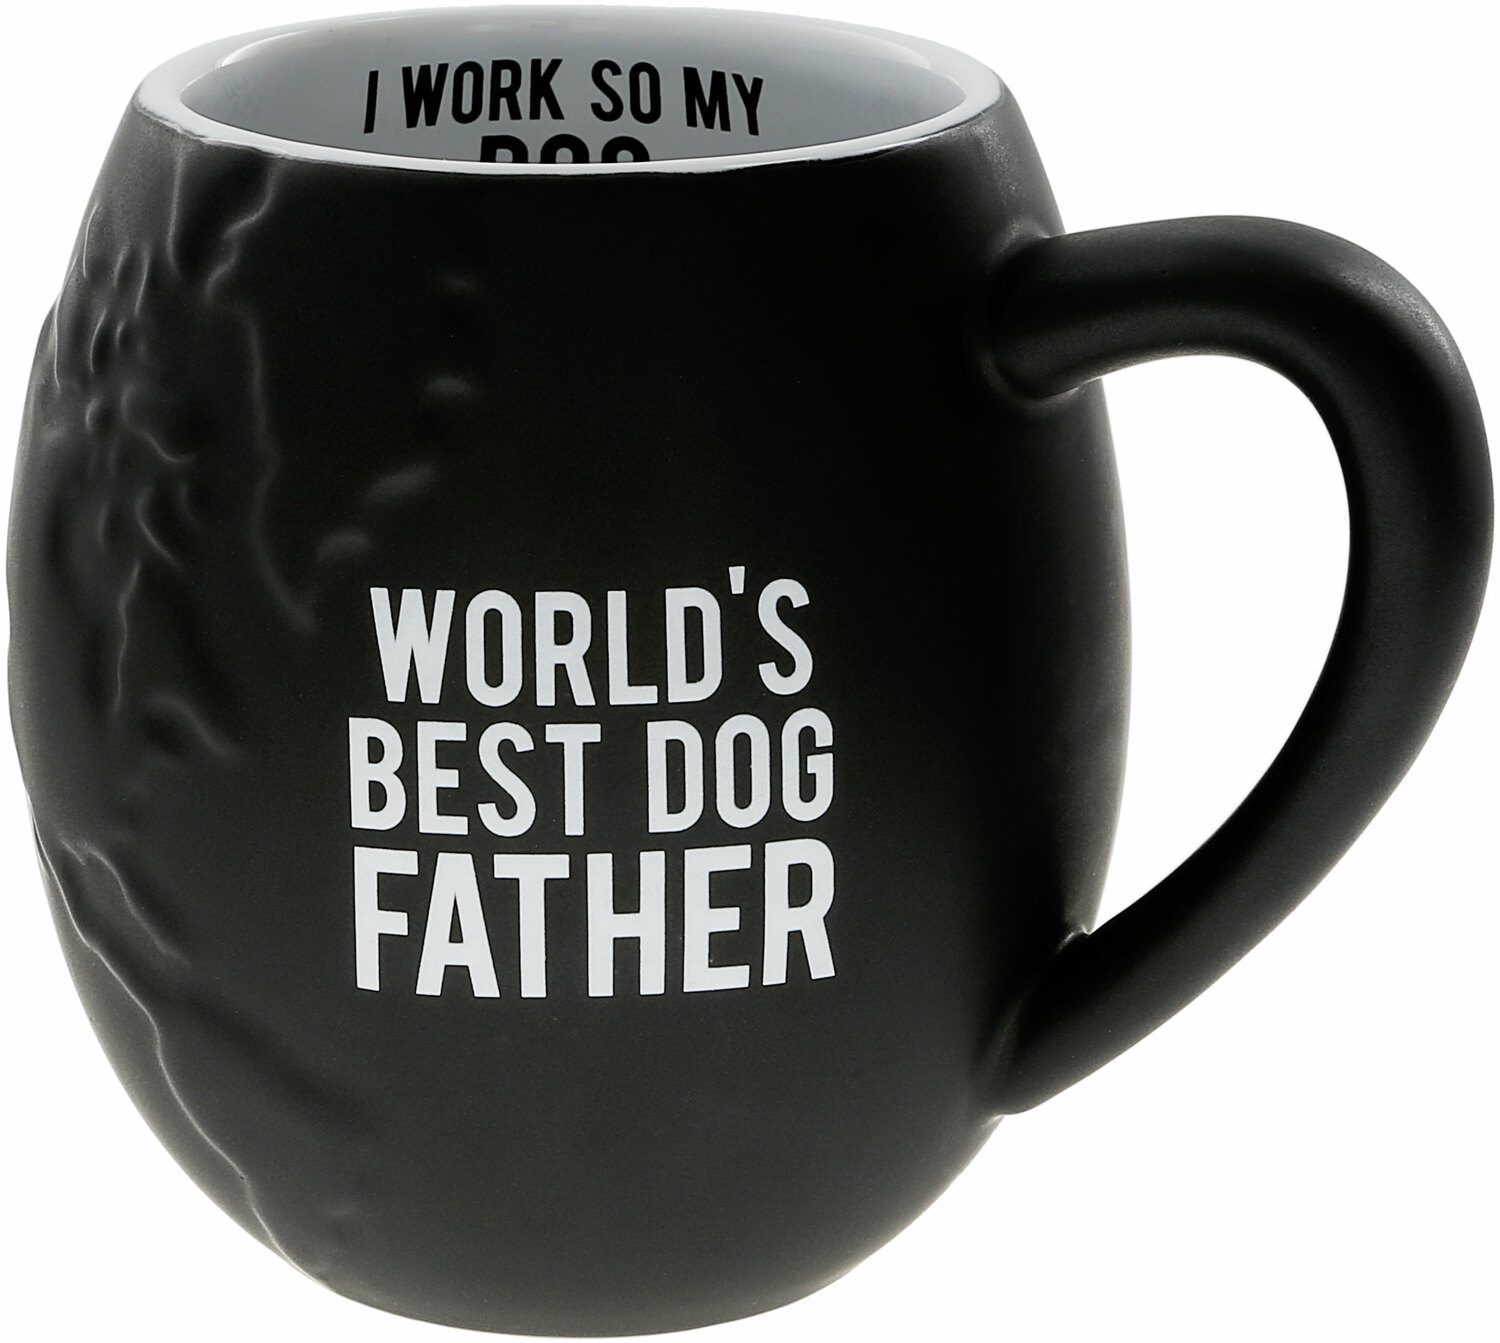 World's Best Dog Father by Man Made - World's Best Dog Father - 20 oz Embossed Mug